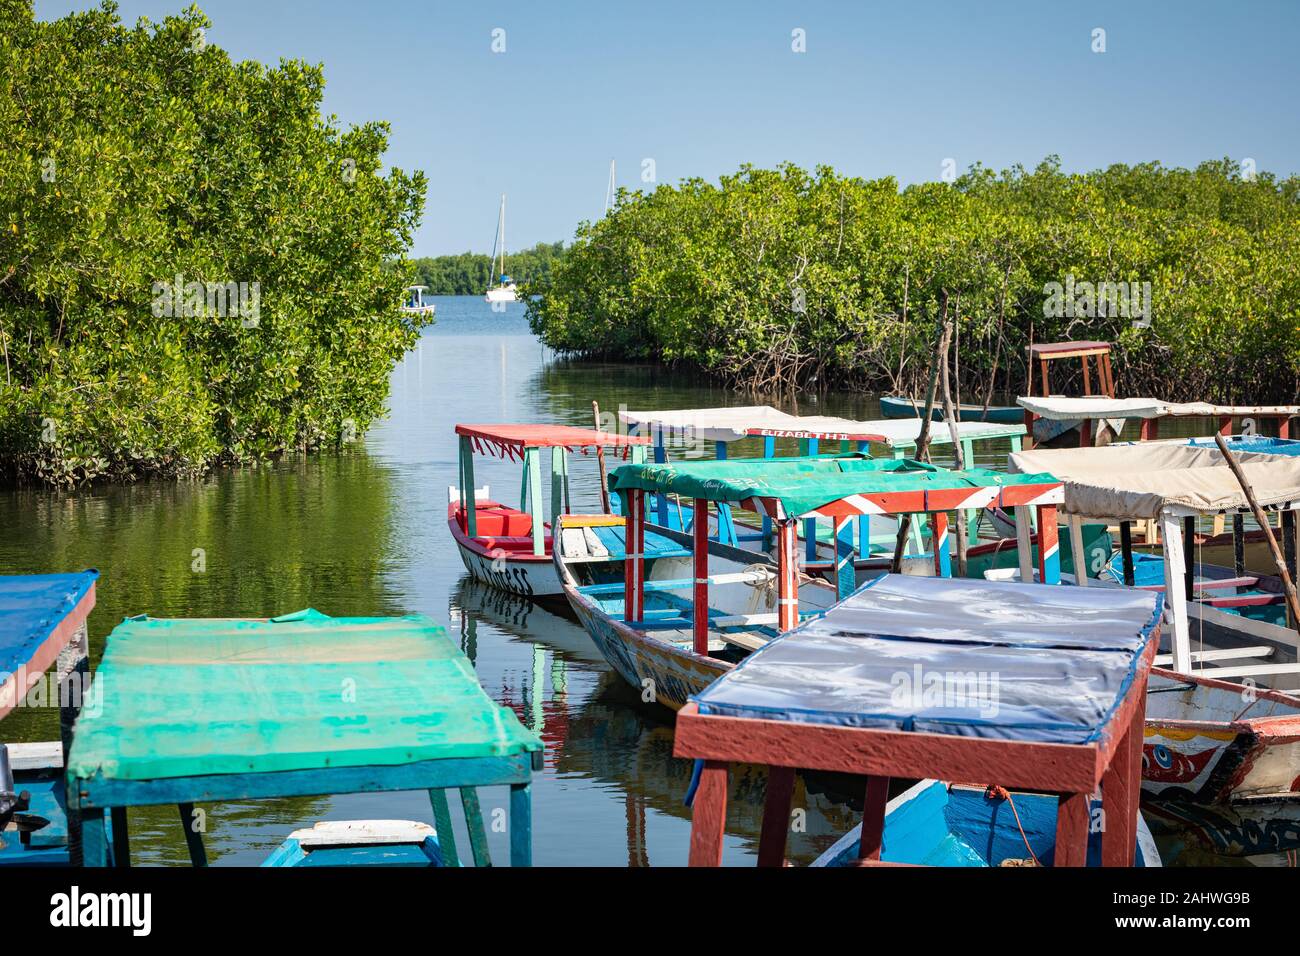 Gambia Mangroven. Lamin Lodge. Traditionelle lange Boote. Green mangrove Bäume im Wald. Gambia. Stockfoto